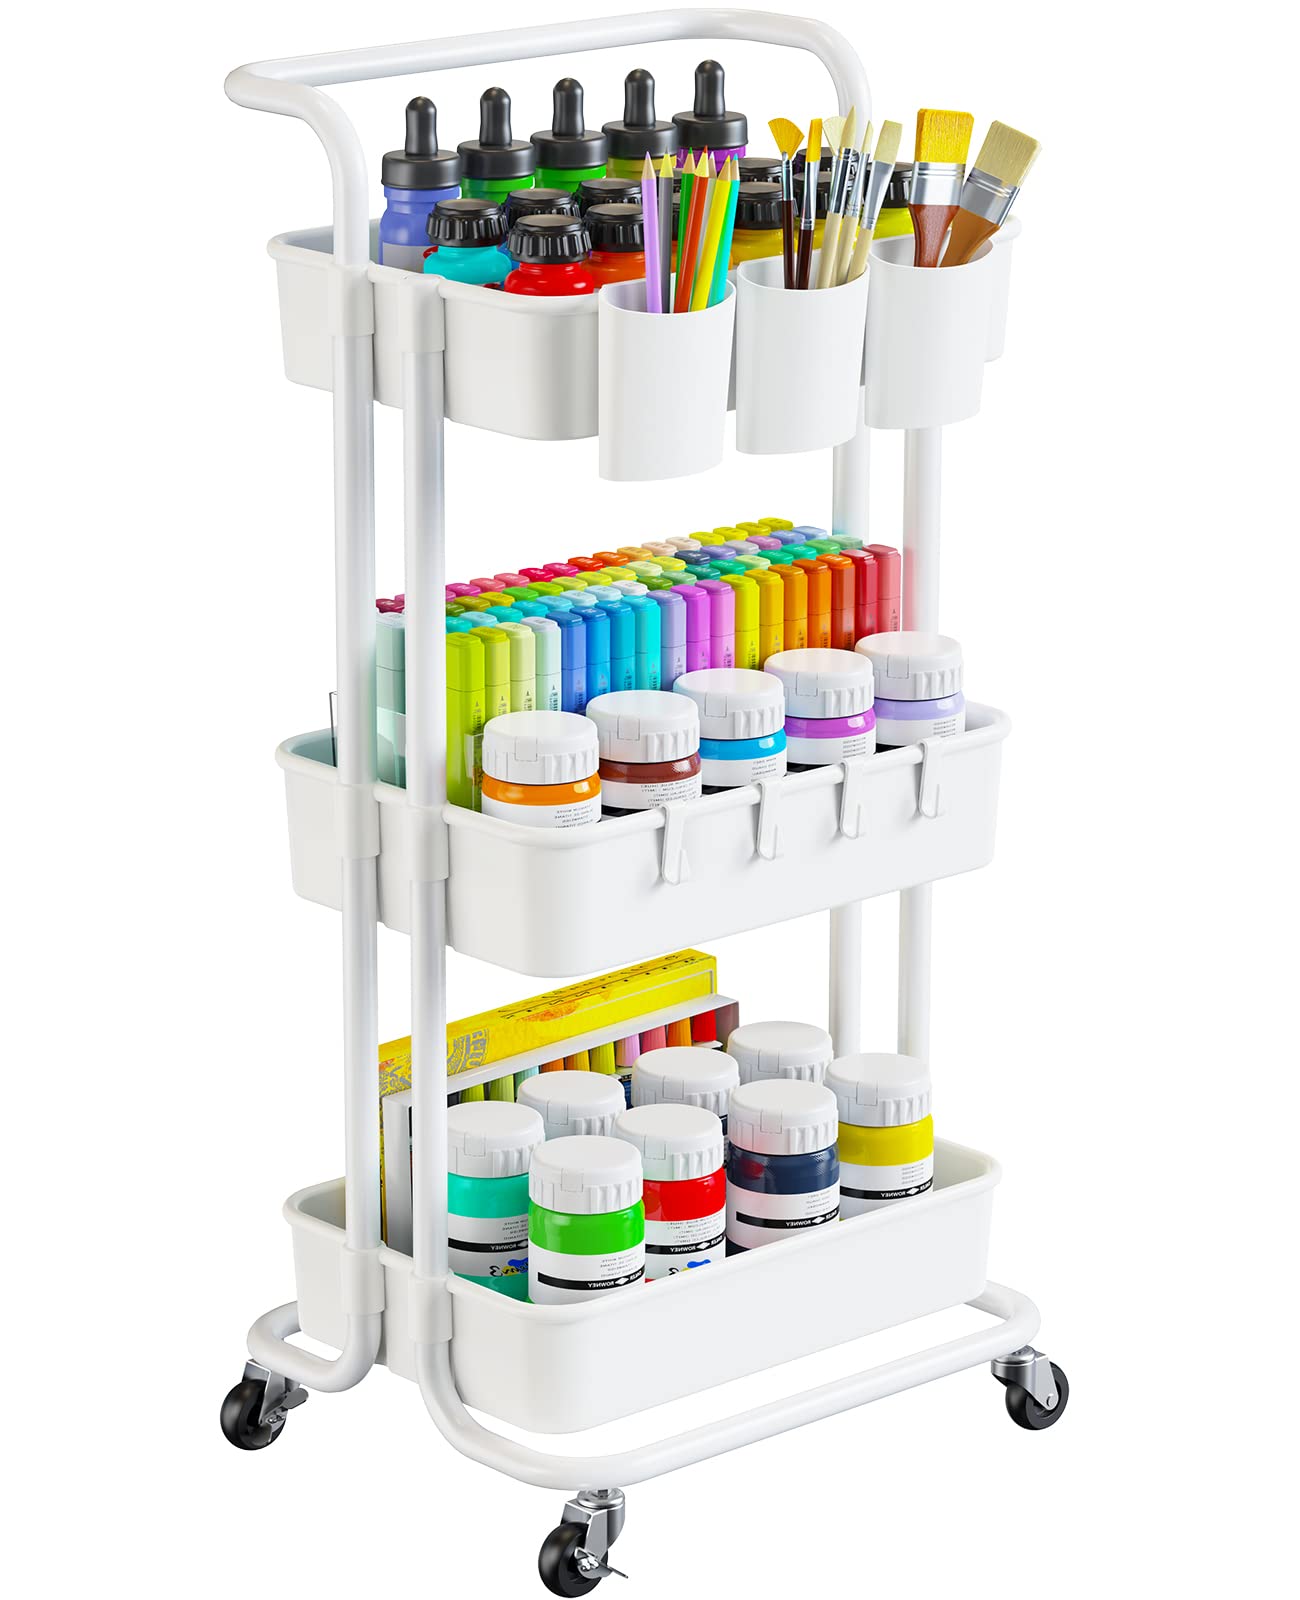 Pipishell 3-Tier Rolling Cart with Wheels - Rolling Storage Cart with Hanging Cups & Hooks - Mobile Utility Cart for Office, Kitchen, Craft Room - Art & Craft Organizer (White, PIUC06W)"